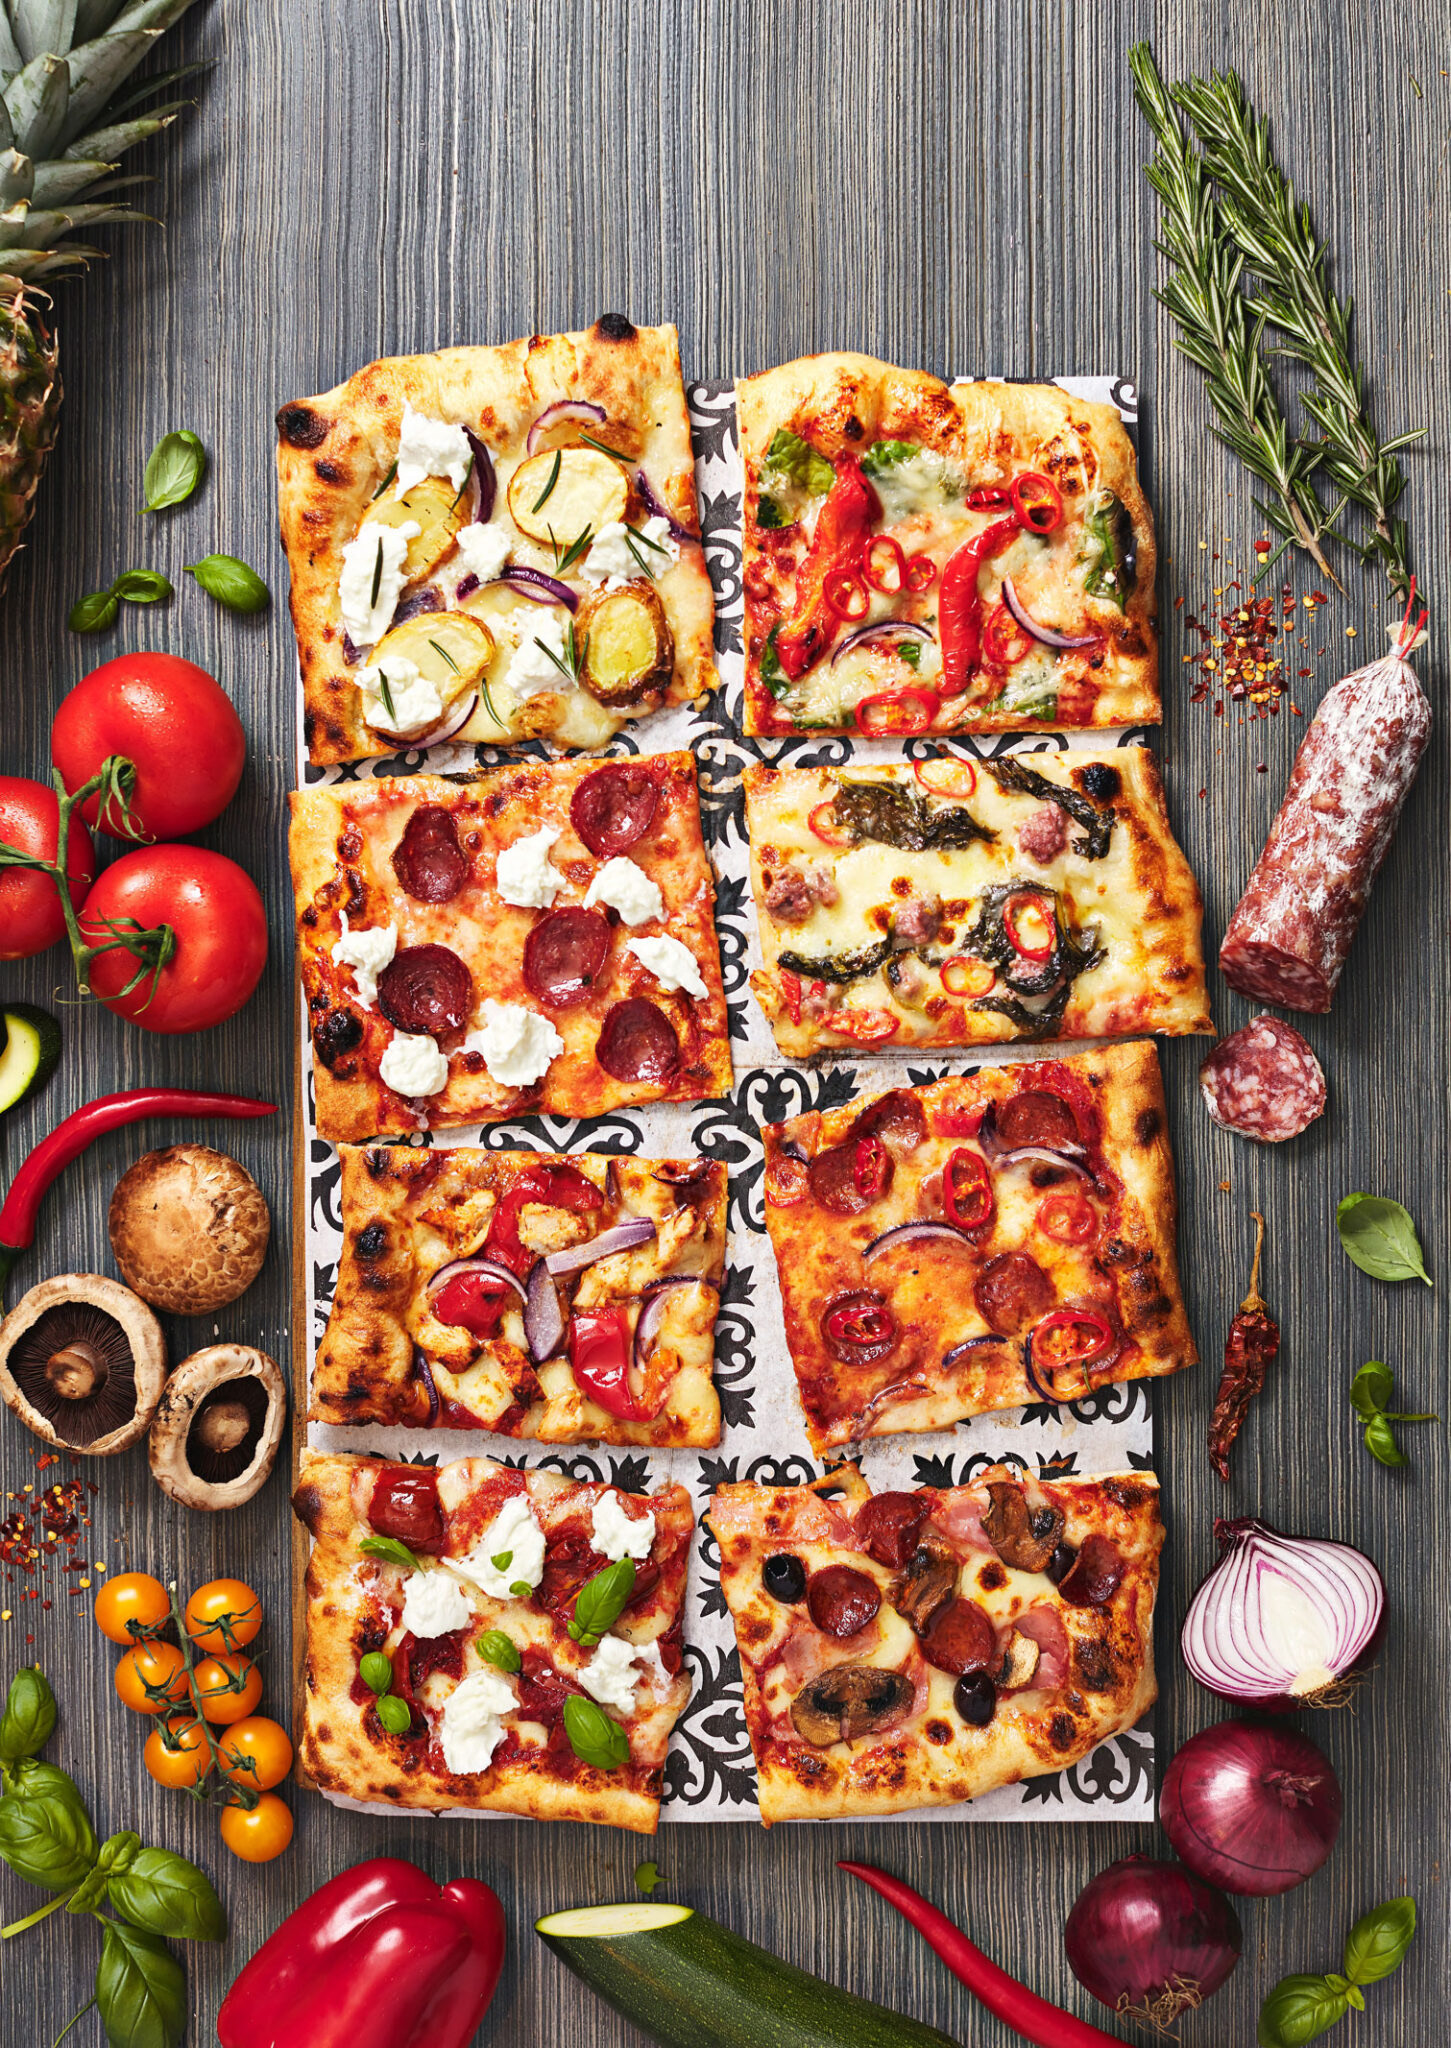 Assorted toppings on Firezzas rectangular pizza with fresh ingredients.